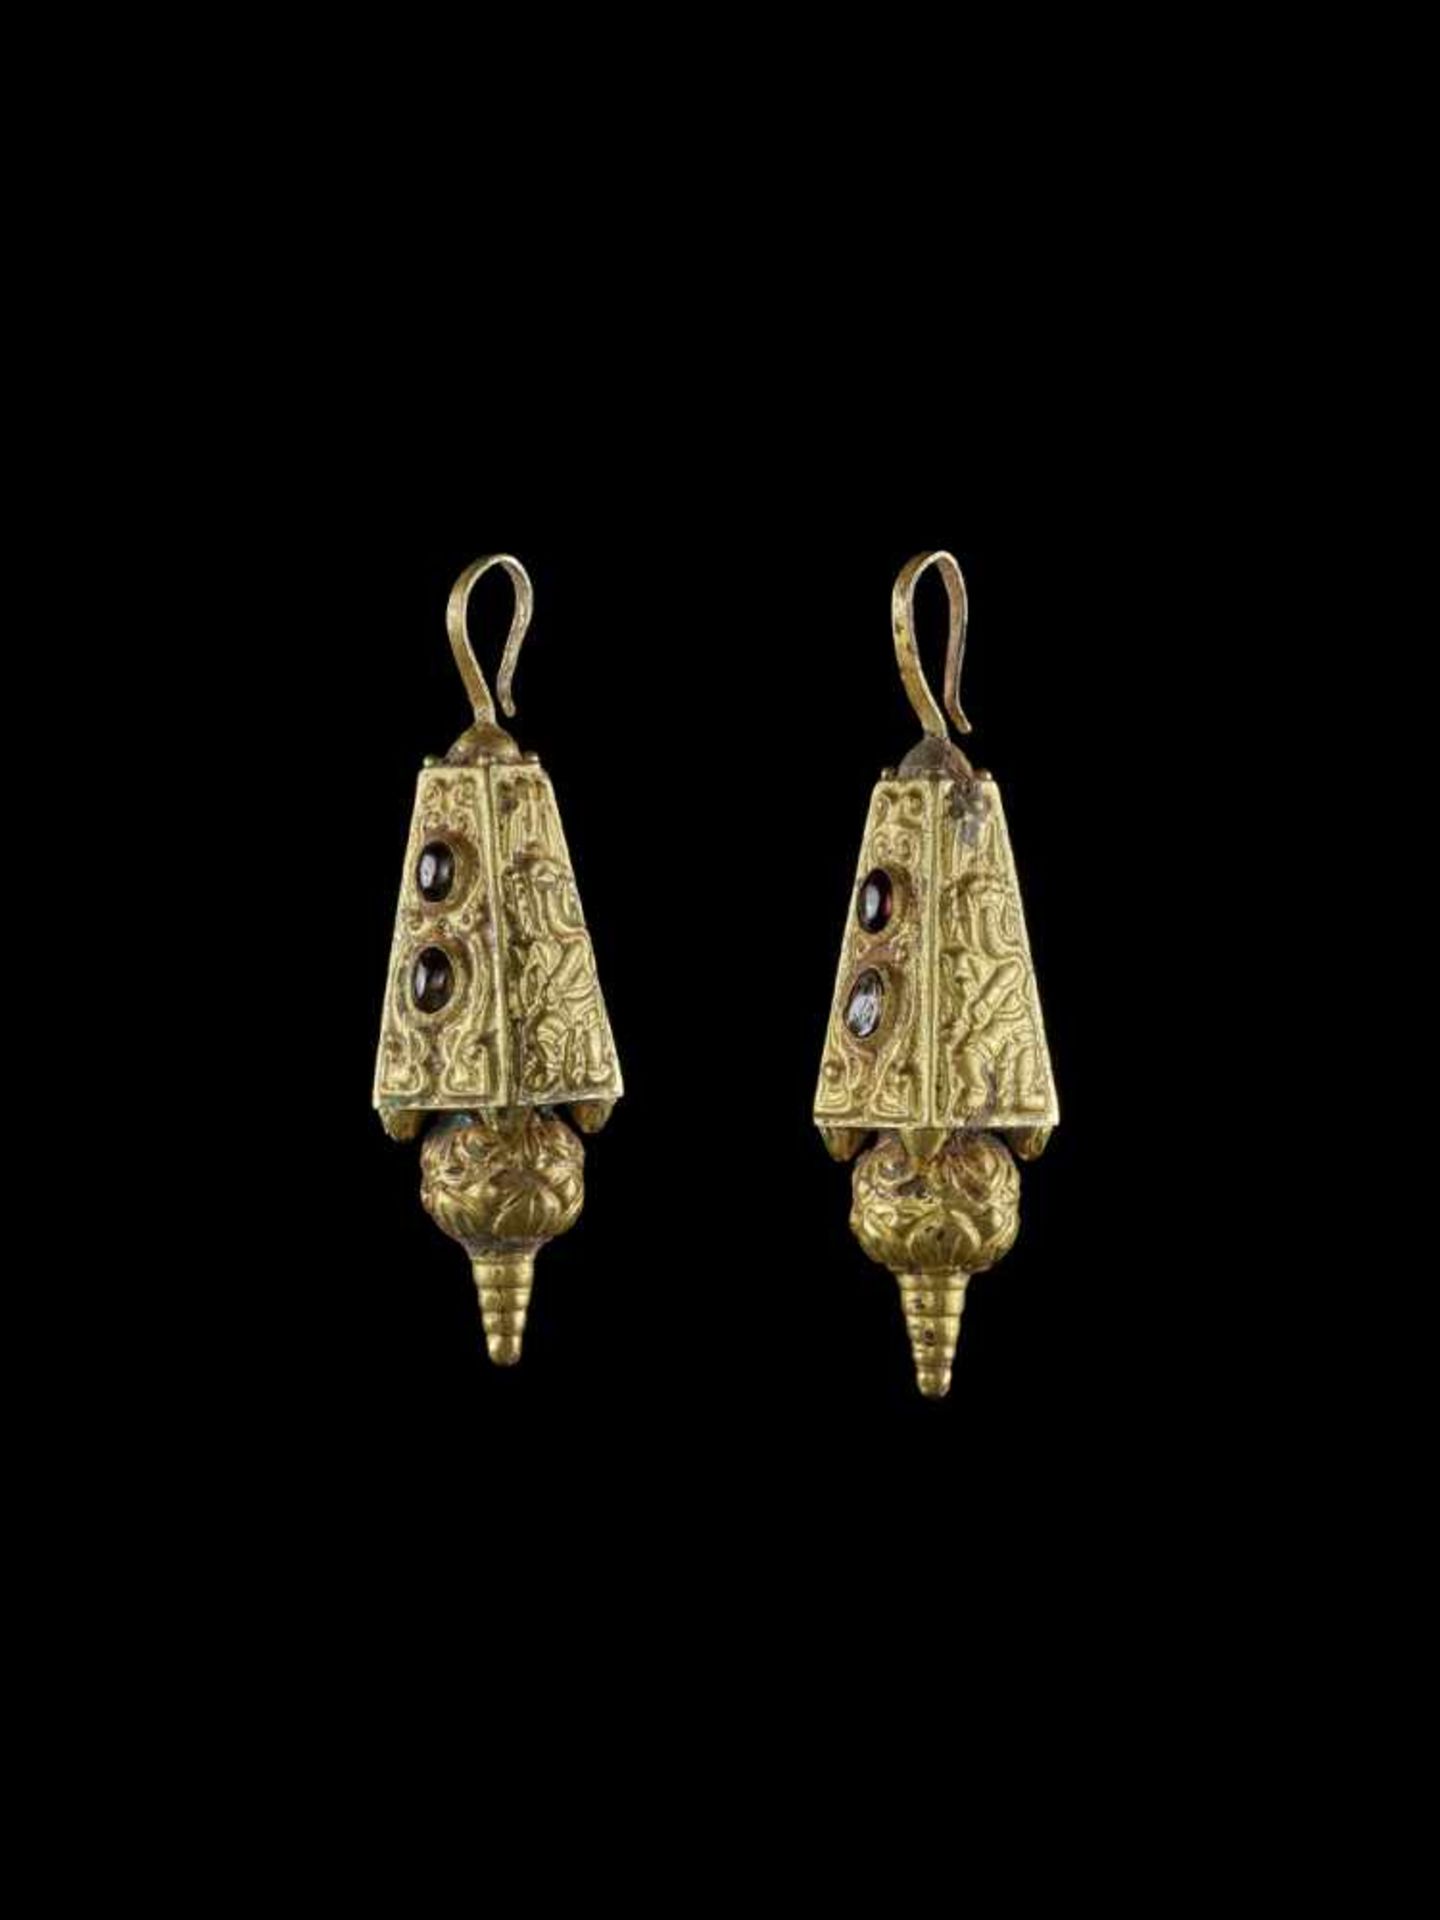 A PAIR OF CHAM REPOUSSÉ GOLD EAR ORNAMENTS WITH GANESHA DANCING Champa, c. 10th – 12th century.